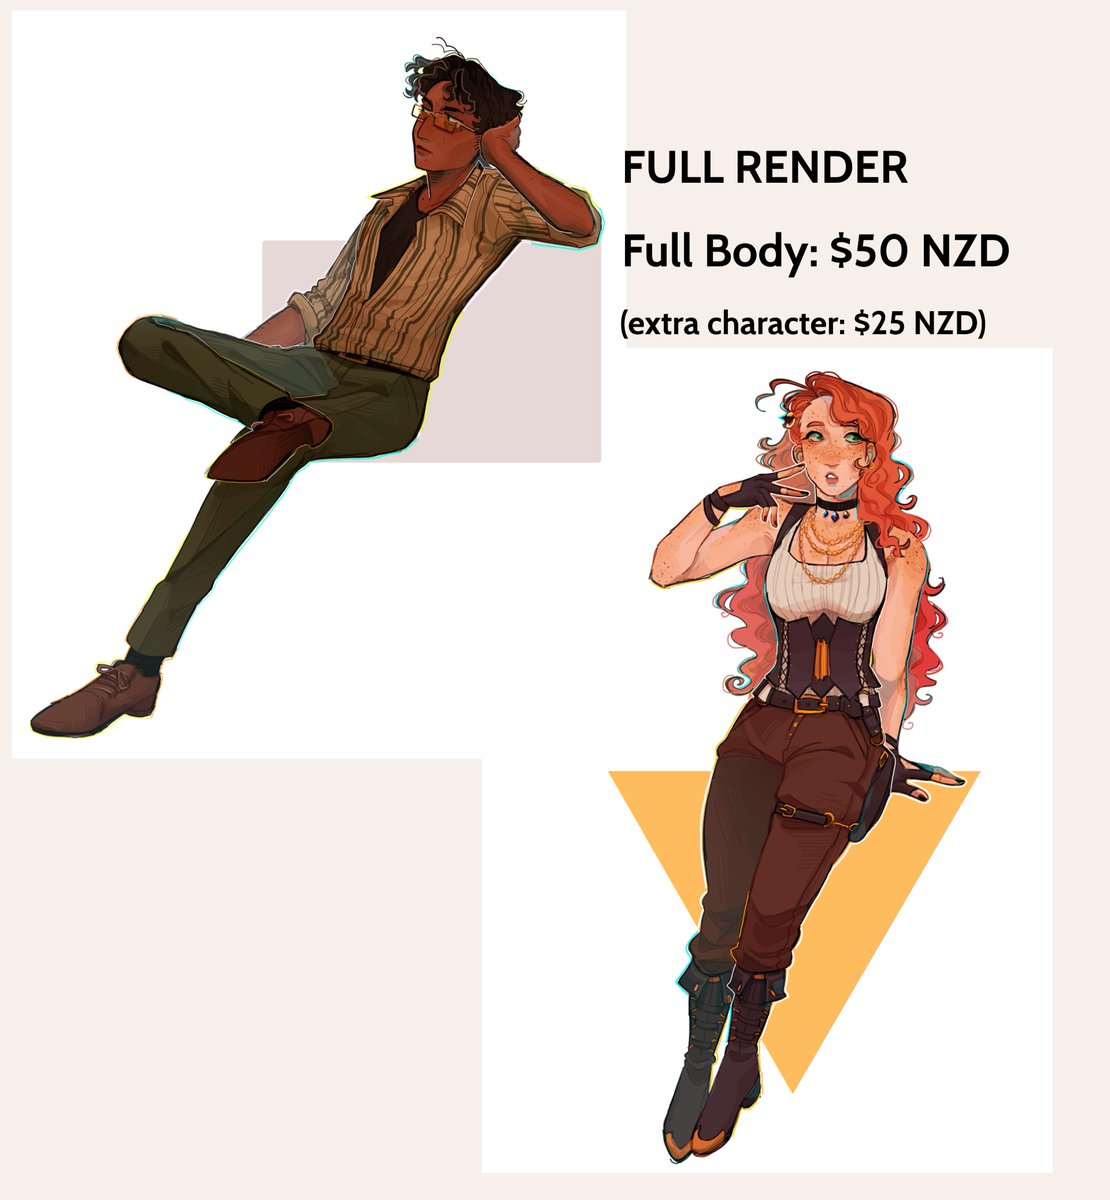 hihi commissions open!! 3 slots available, dm if interested. I just want to buy a ranboo varsity jacket off my friend jdbdks- I really want the jacket.
Pricing for flat colours and line art below 